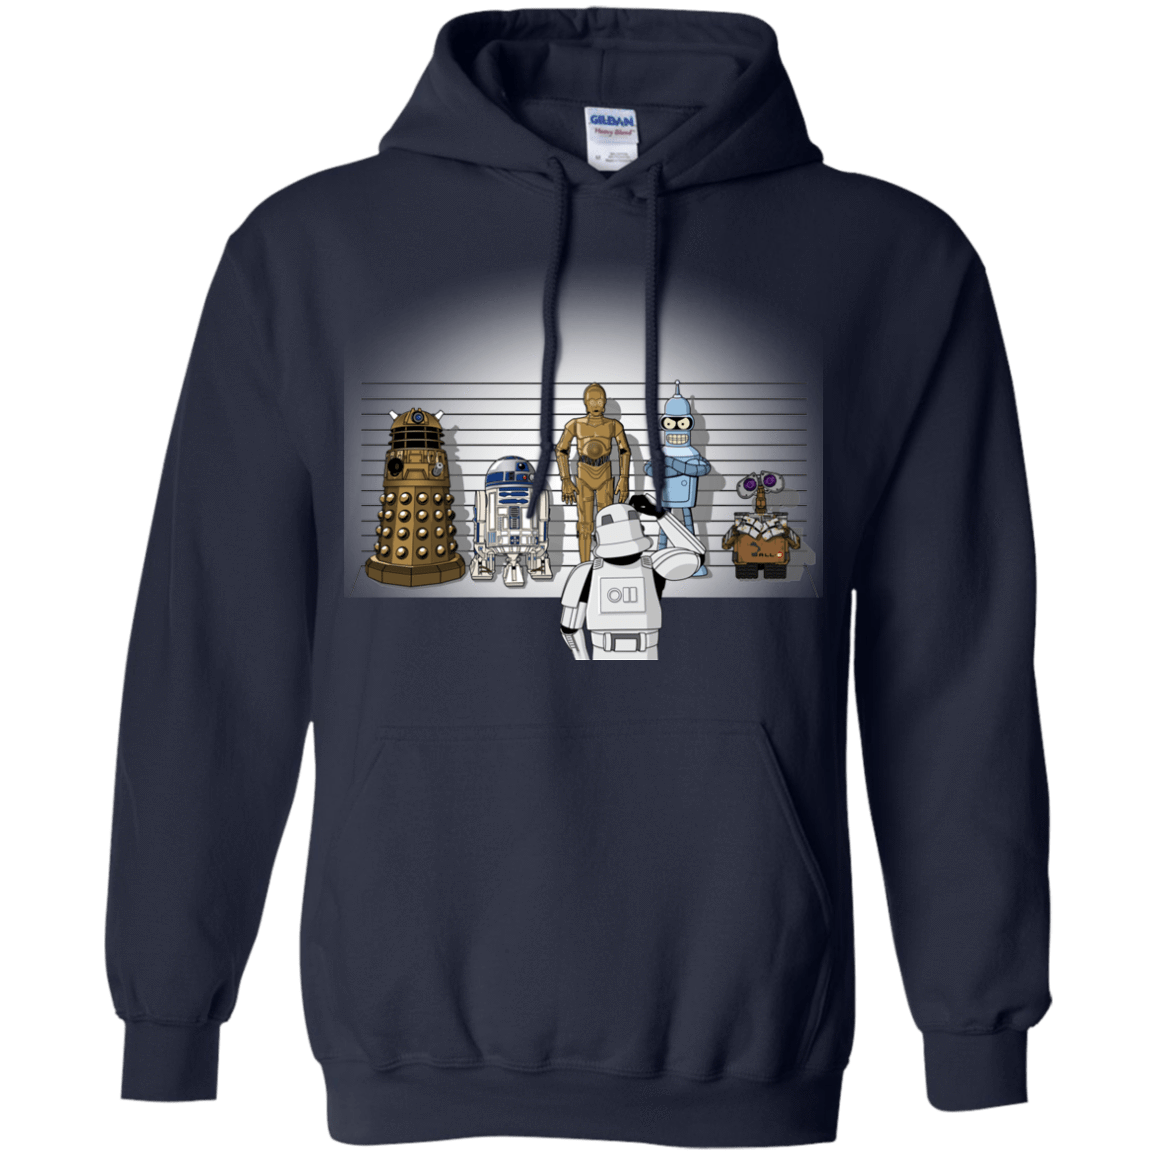 Sweatshirts Navy / Small Are These Droids Pullover Hoodie